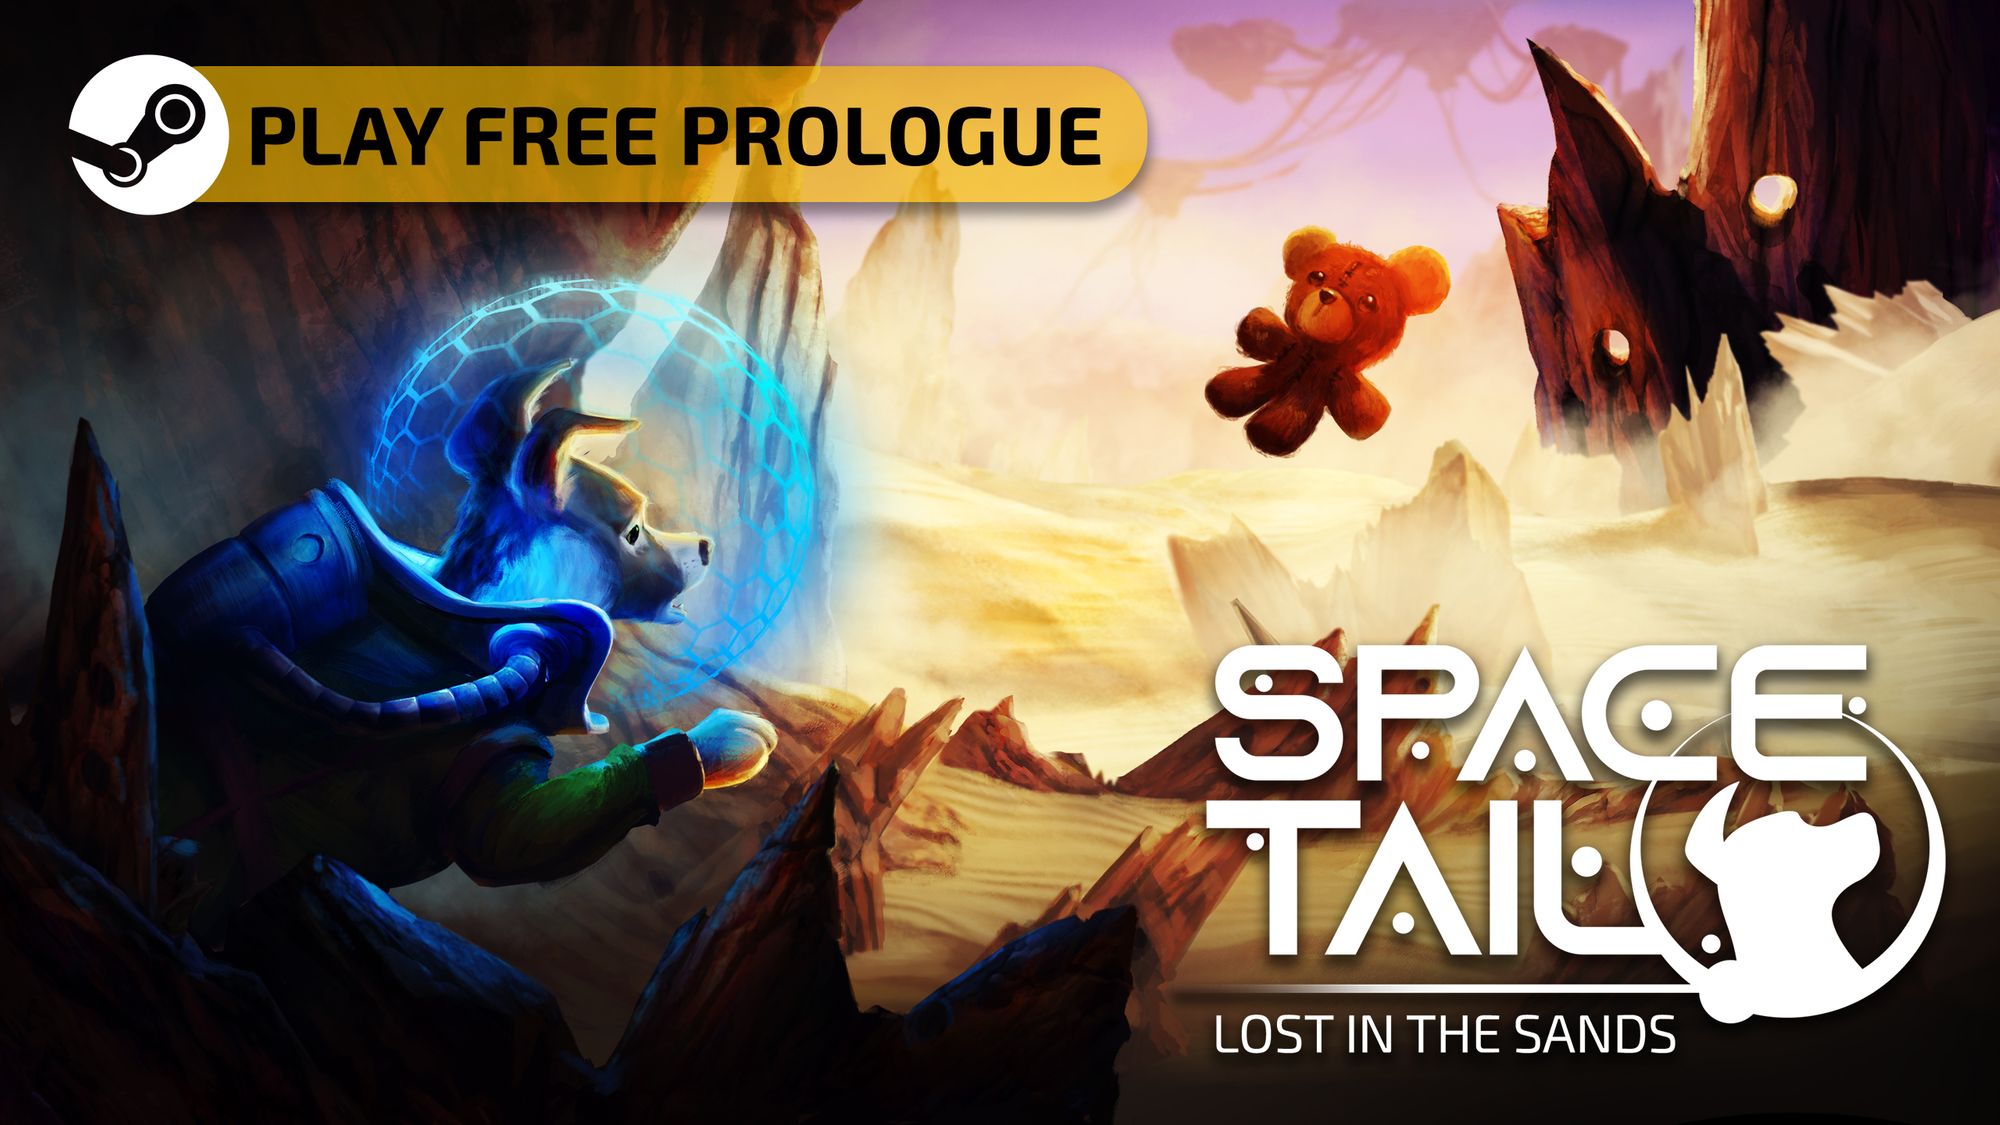 "Space Tail: Lost In The Sands" - darmowy prolog dostępny na Steam od 12.08.2022!